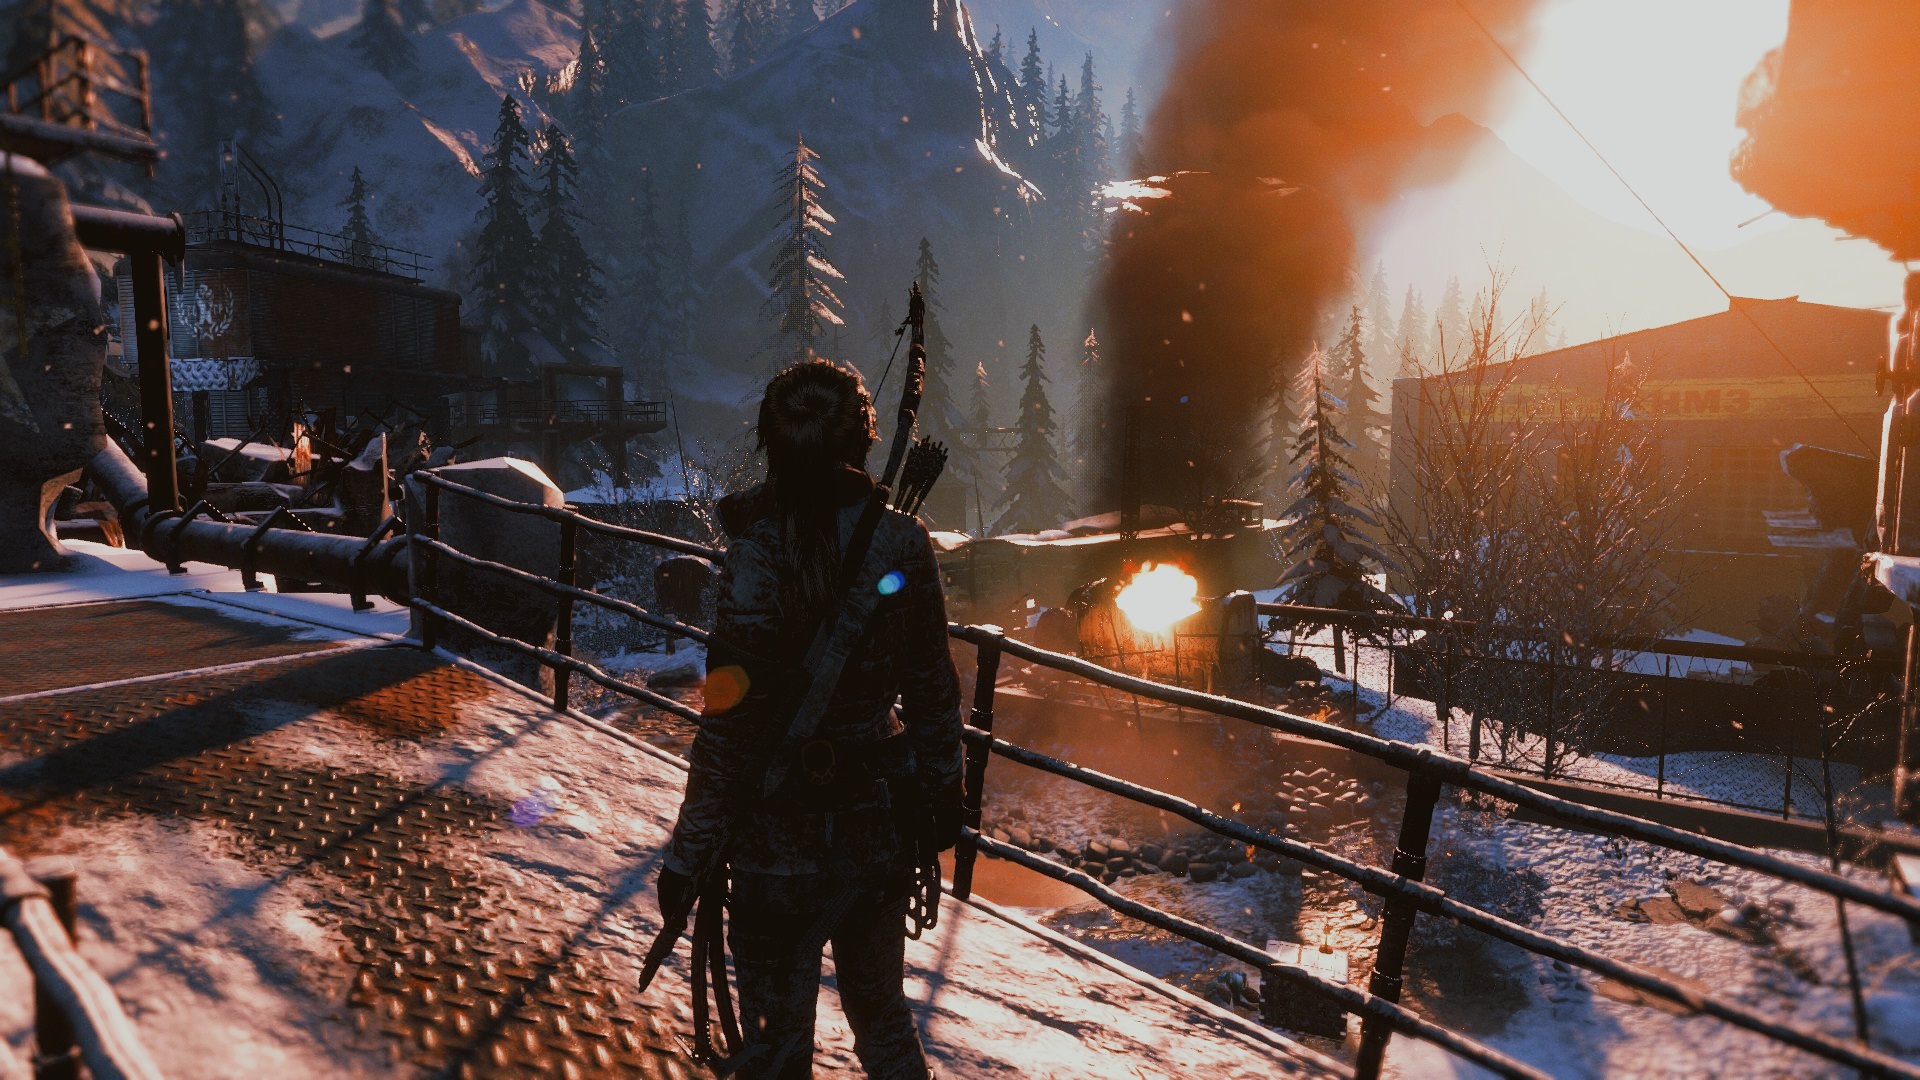 Rise of the Tomb Raider ★ Quentin's - CrystalVision ★.